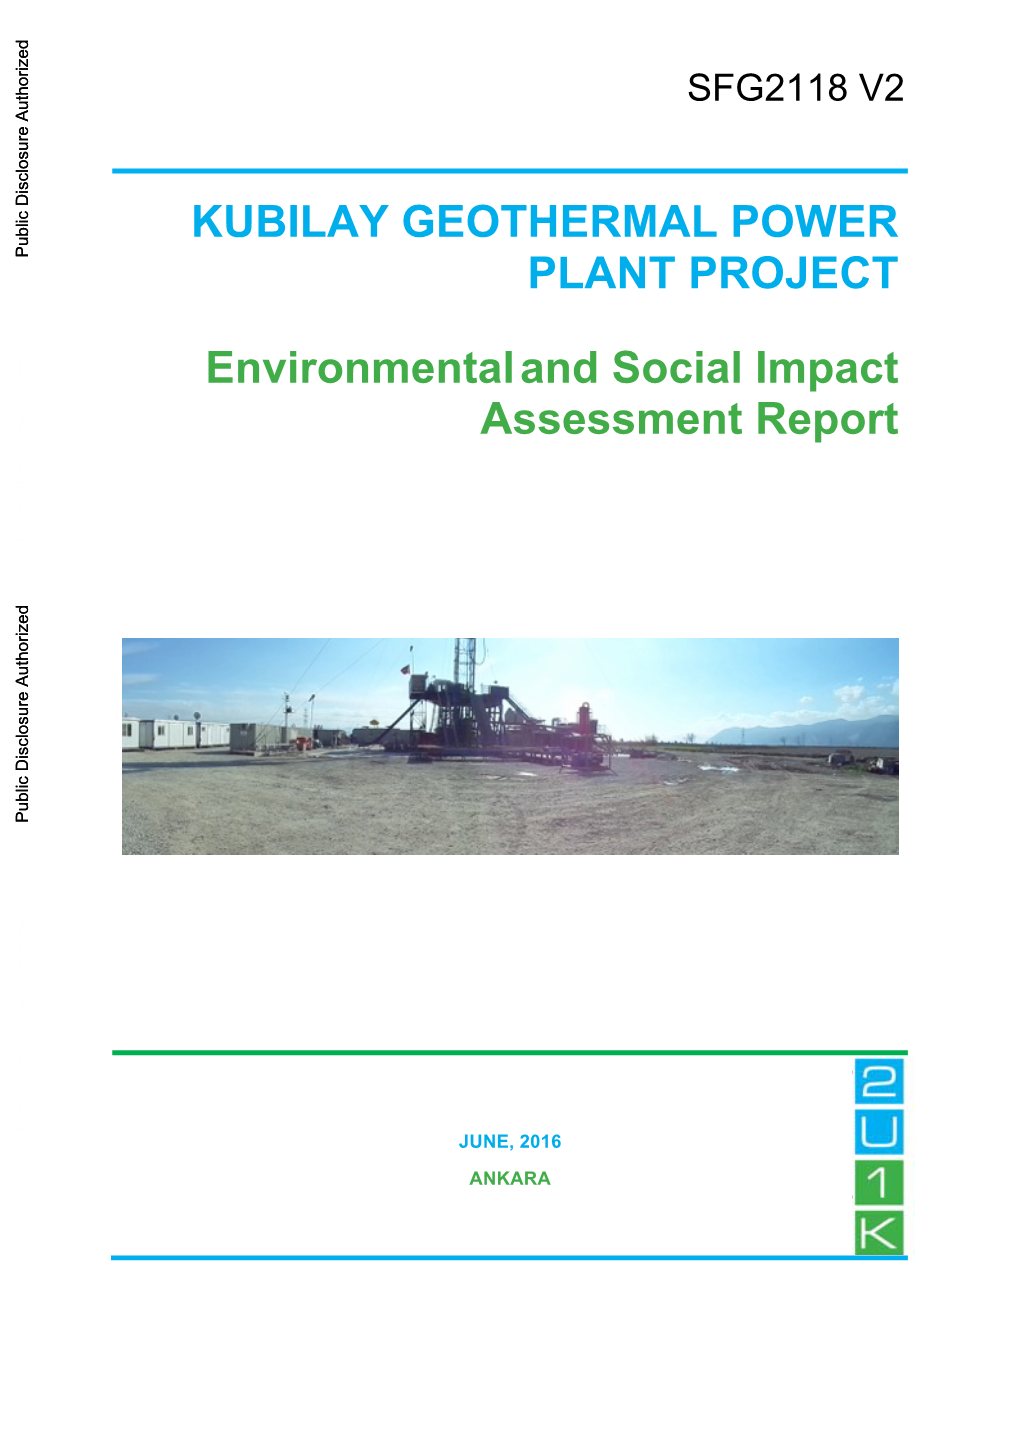 Kubilay Geothermal Power Plant Project